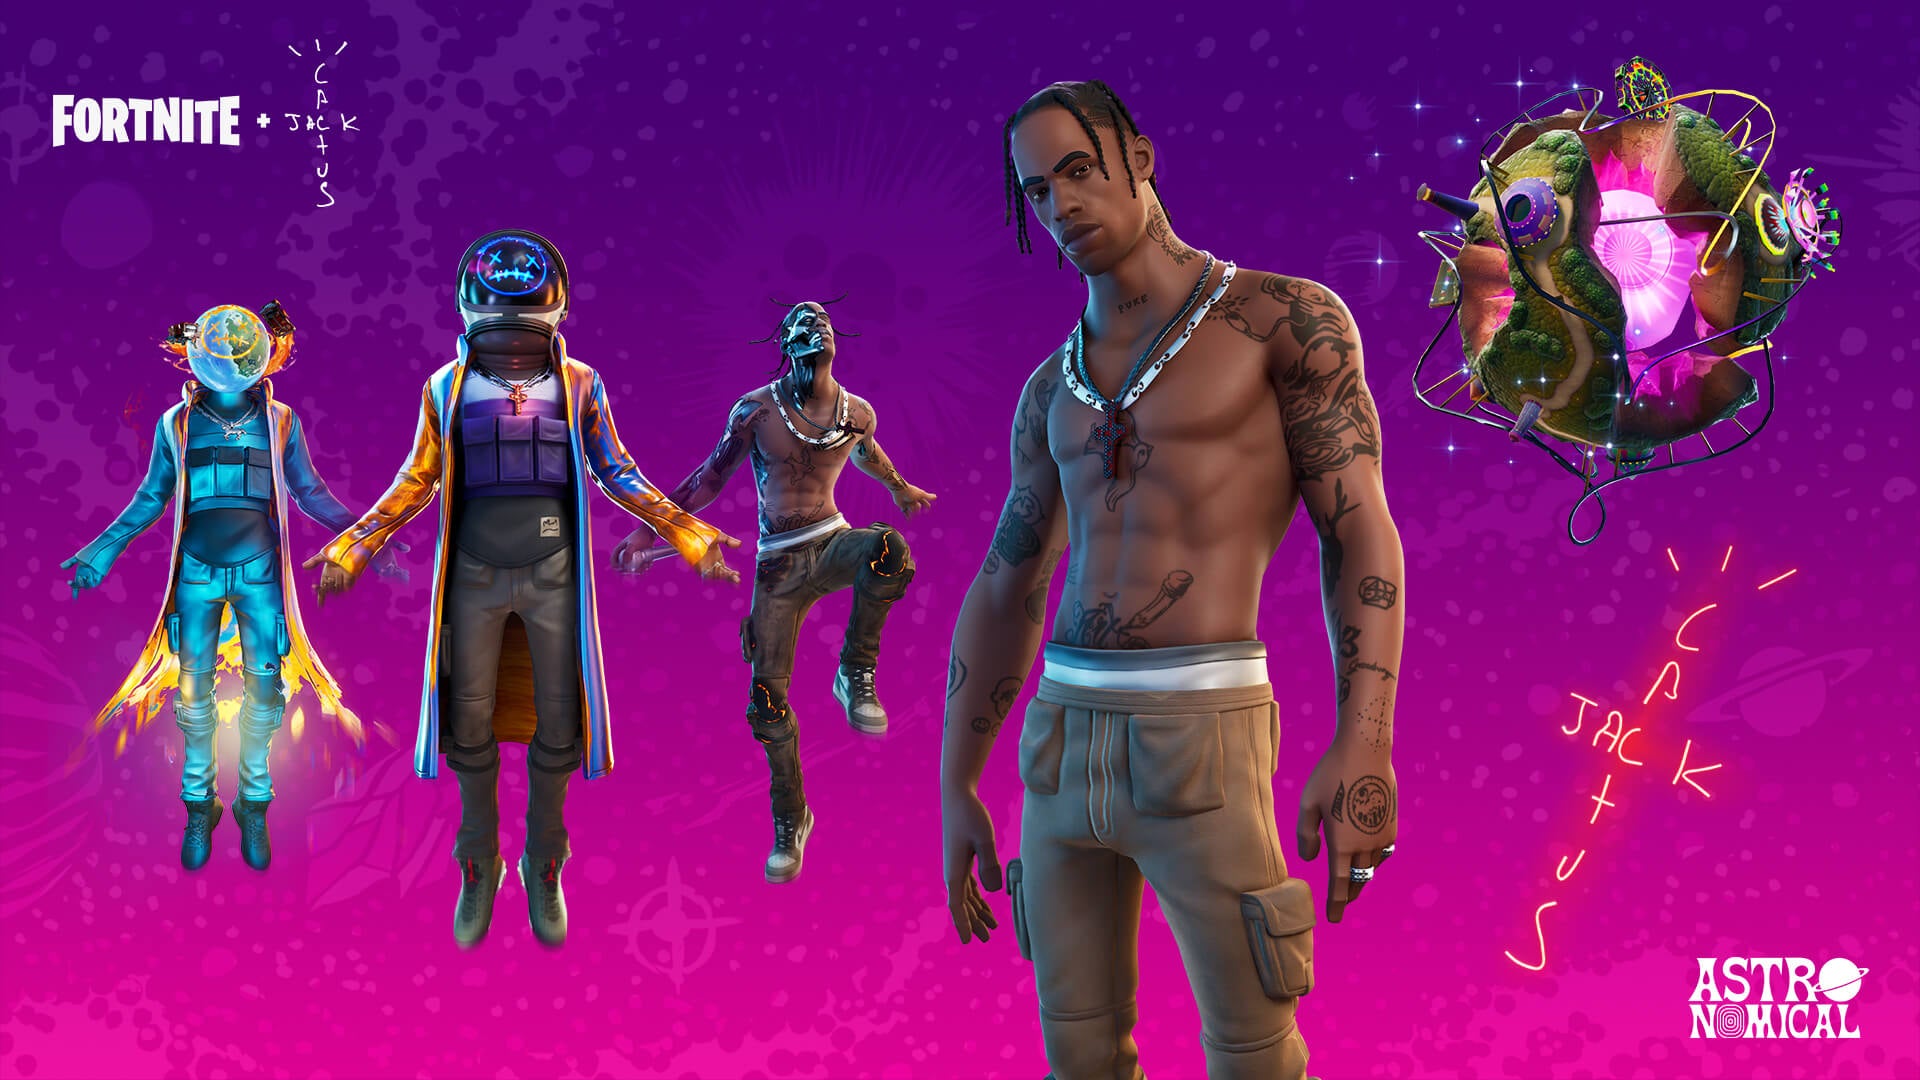 Image for Epic has pulled the Travis Scott emote from Fortnite's shop following concert tragedy